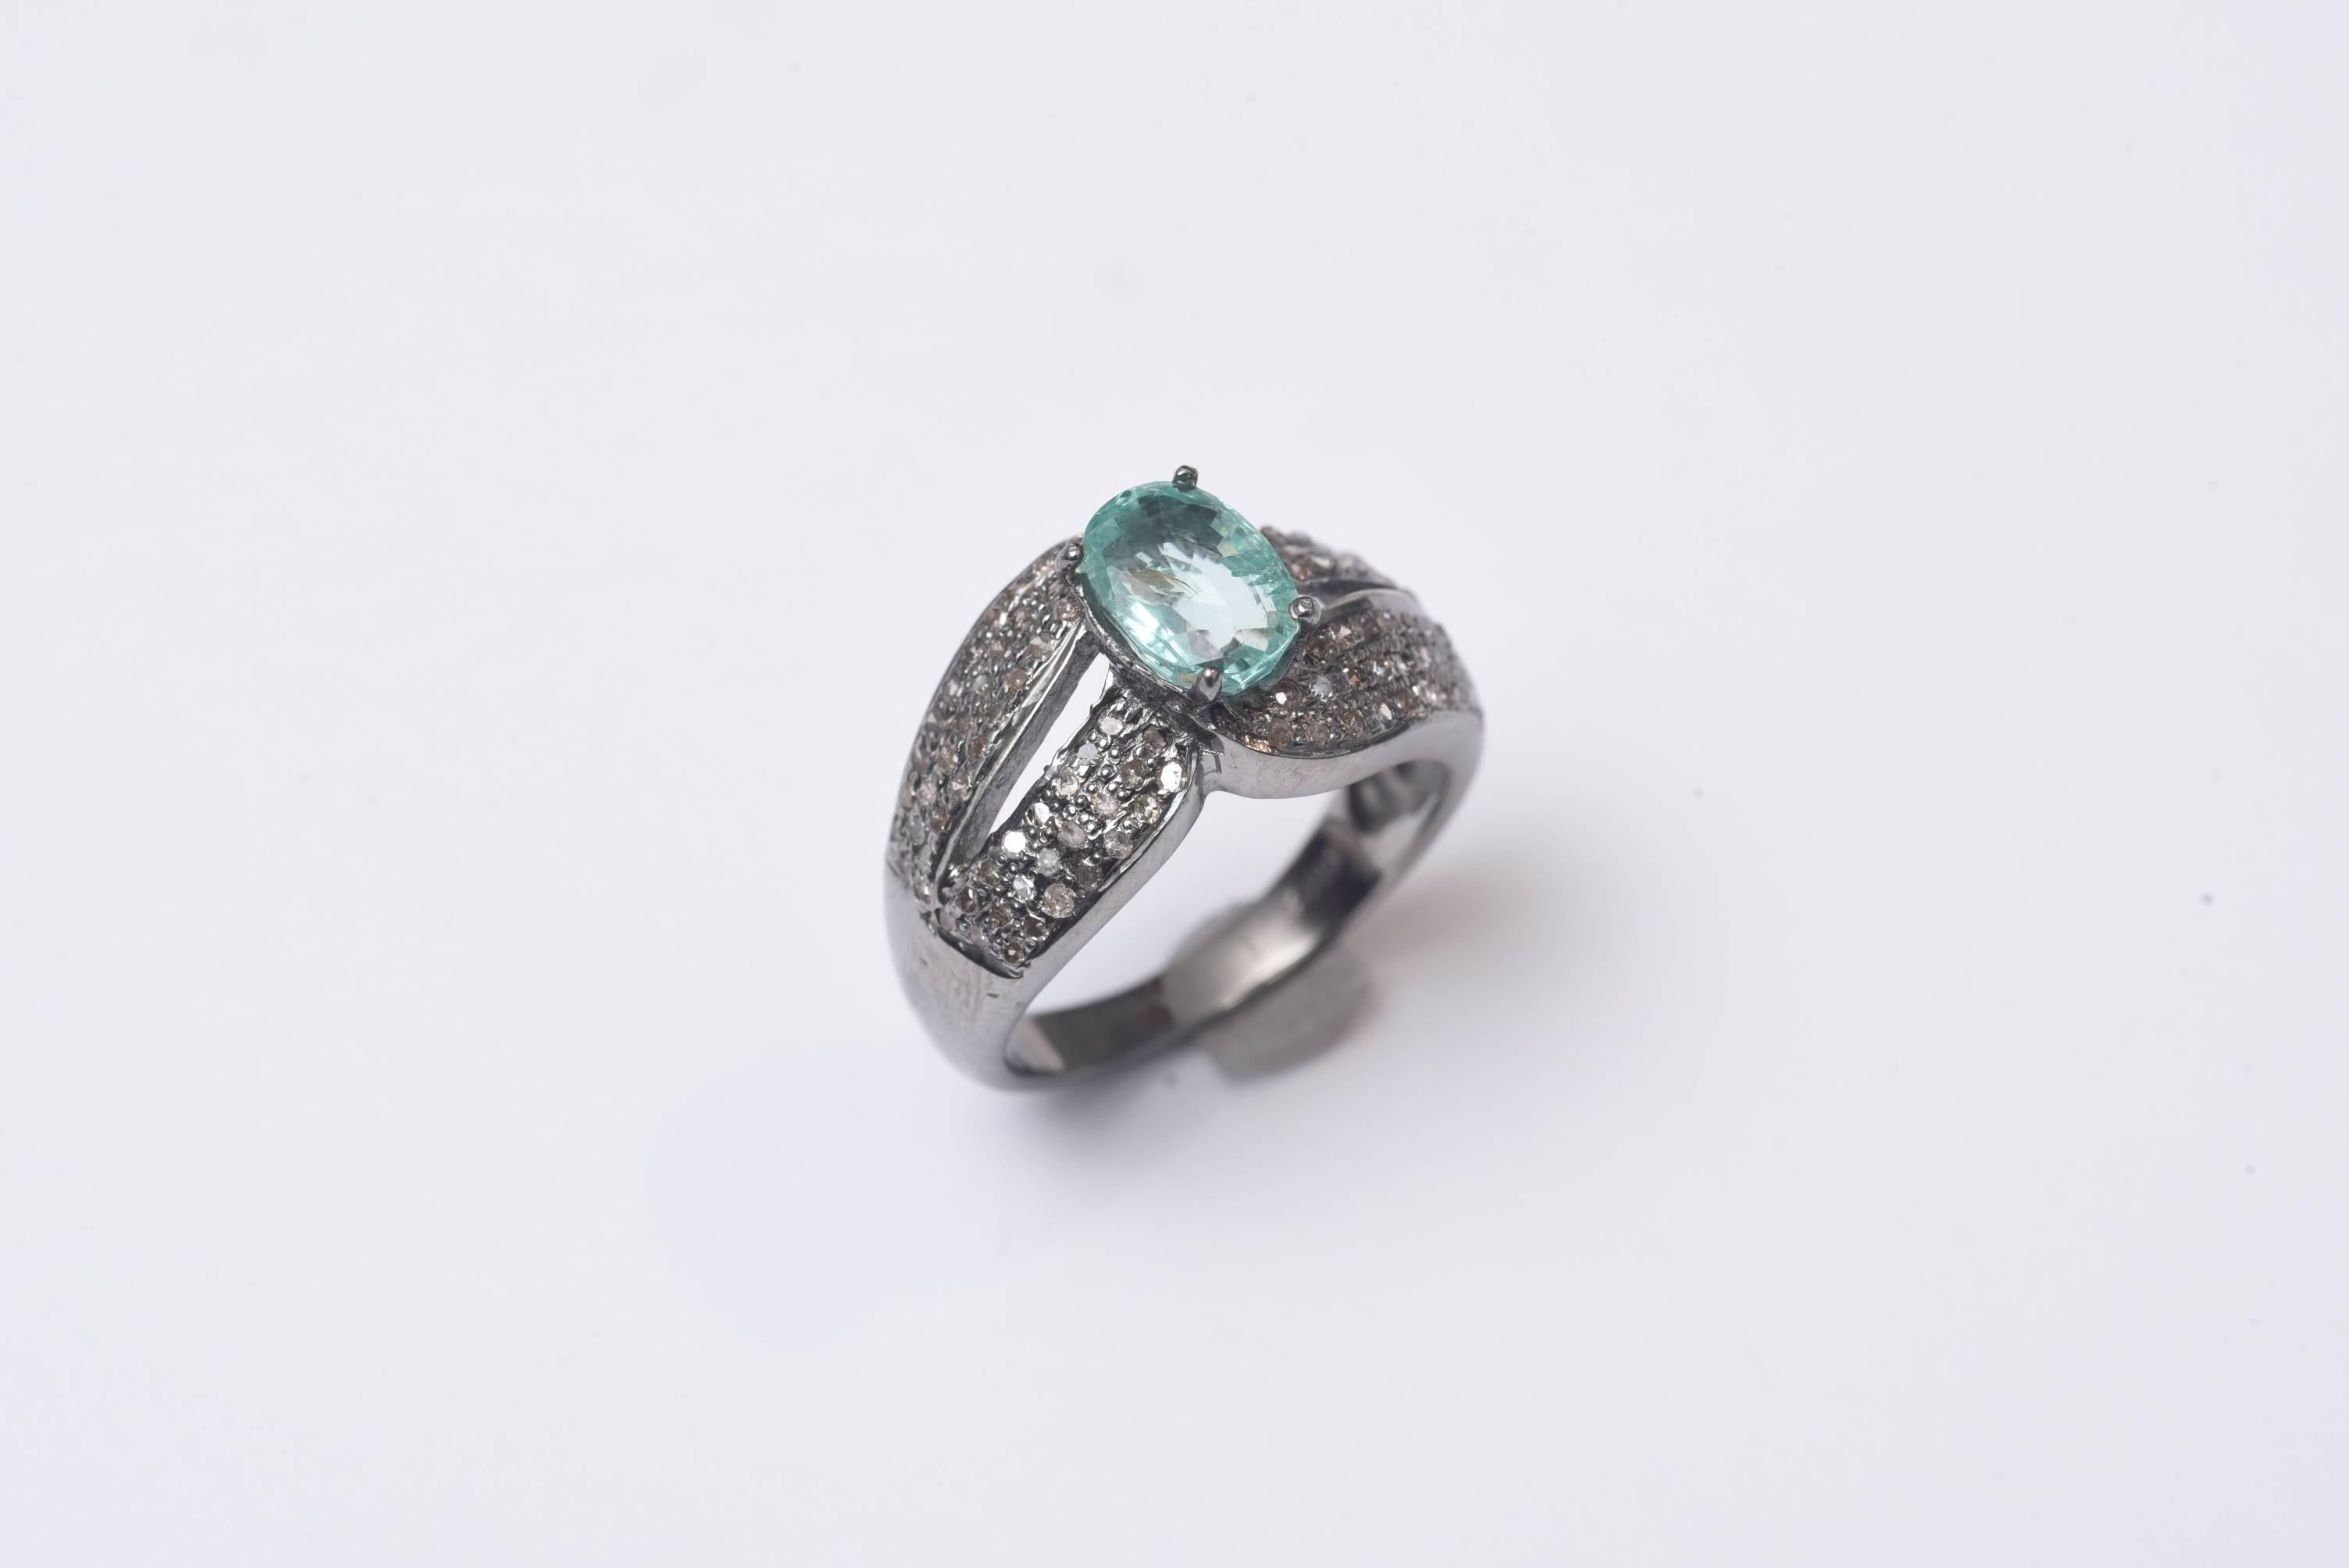 Large oval faceted blue aquamarine with pave` set diamonds along the top of the band, set in oxidized sterling silver.  Carat weight of aquamarine is 1.25, diamonds are .74 carats.  Ring size is 6 3/4.